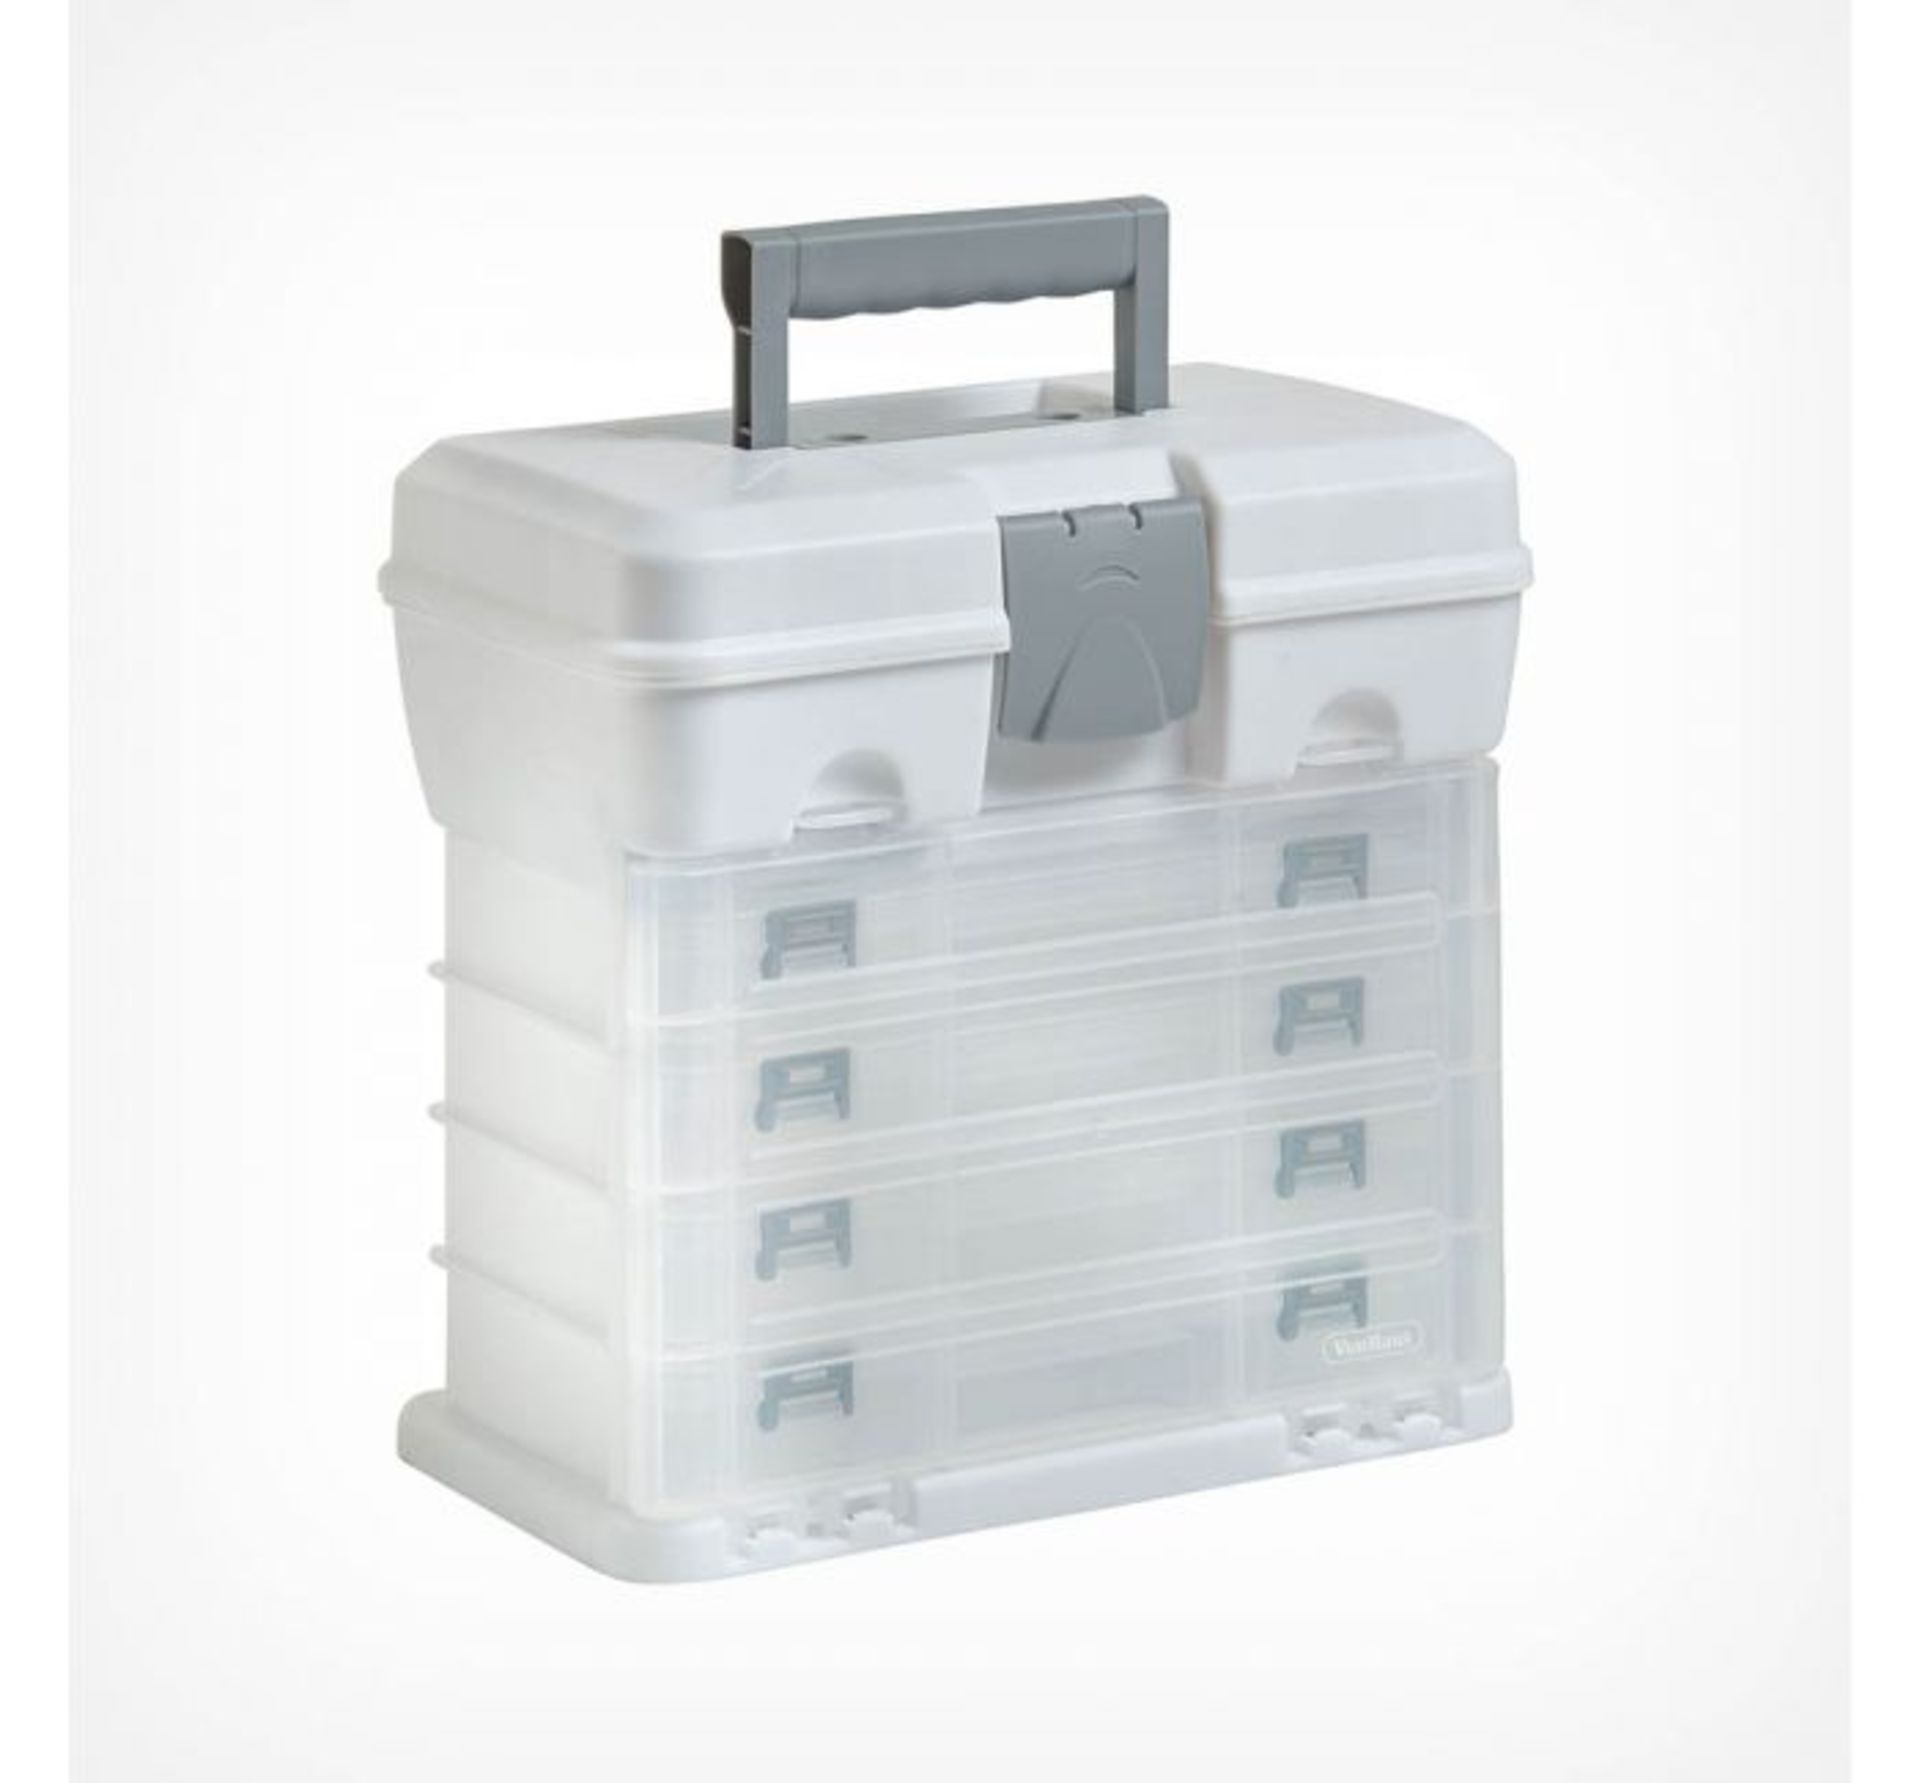 (OM5) Storage Carry Case Ideal for storing arts & crafts supplies, sewing bits, jewellery, acc... - Image 2 of 3